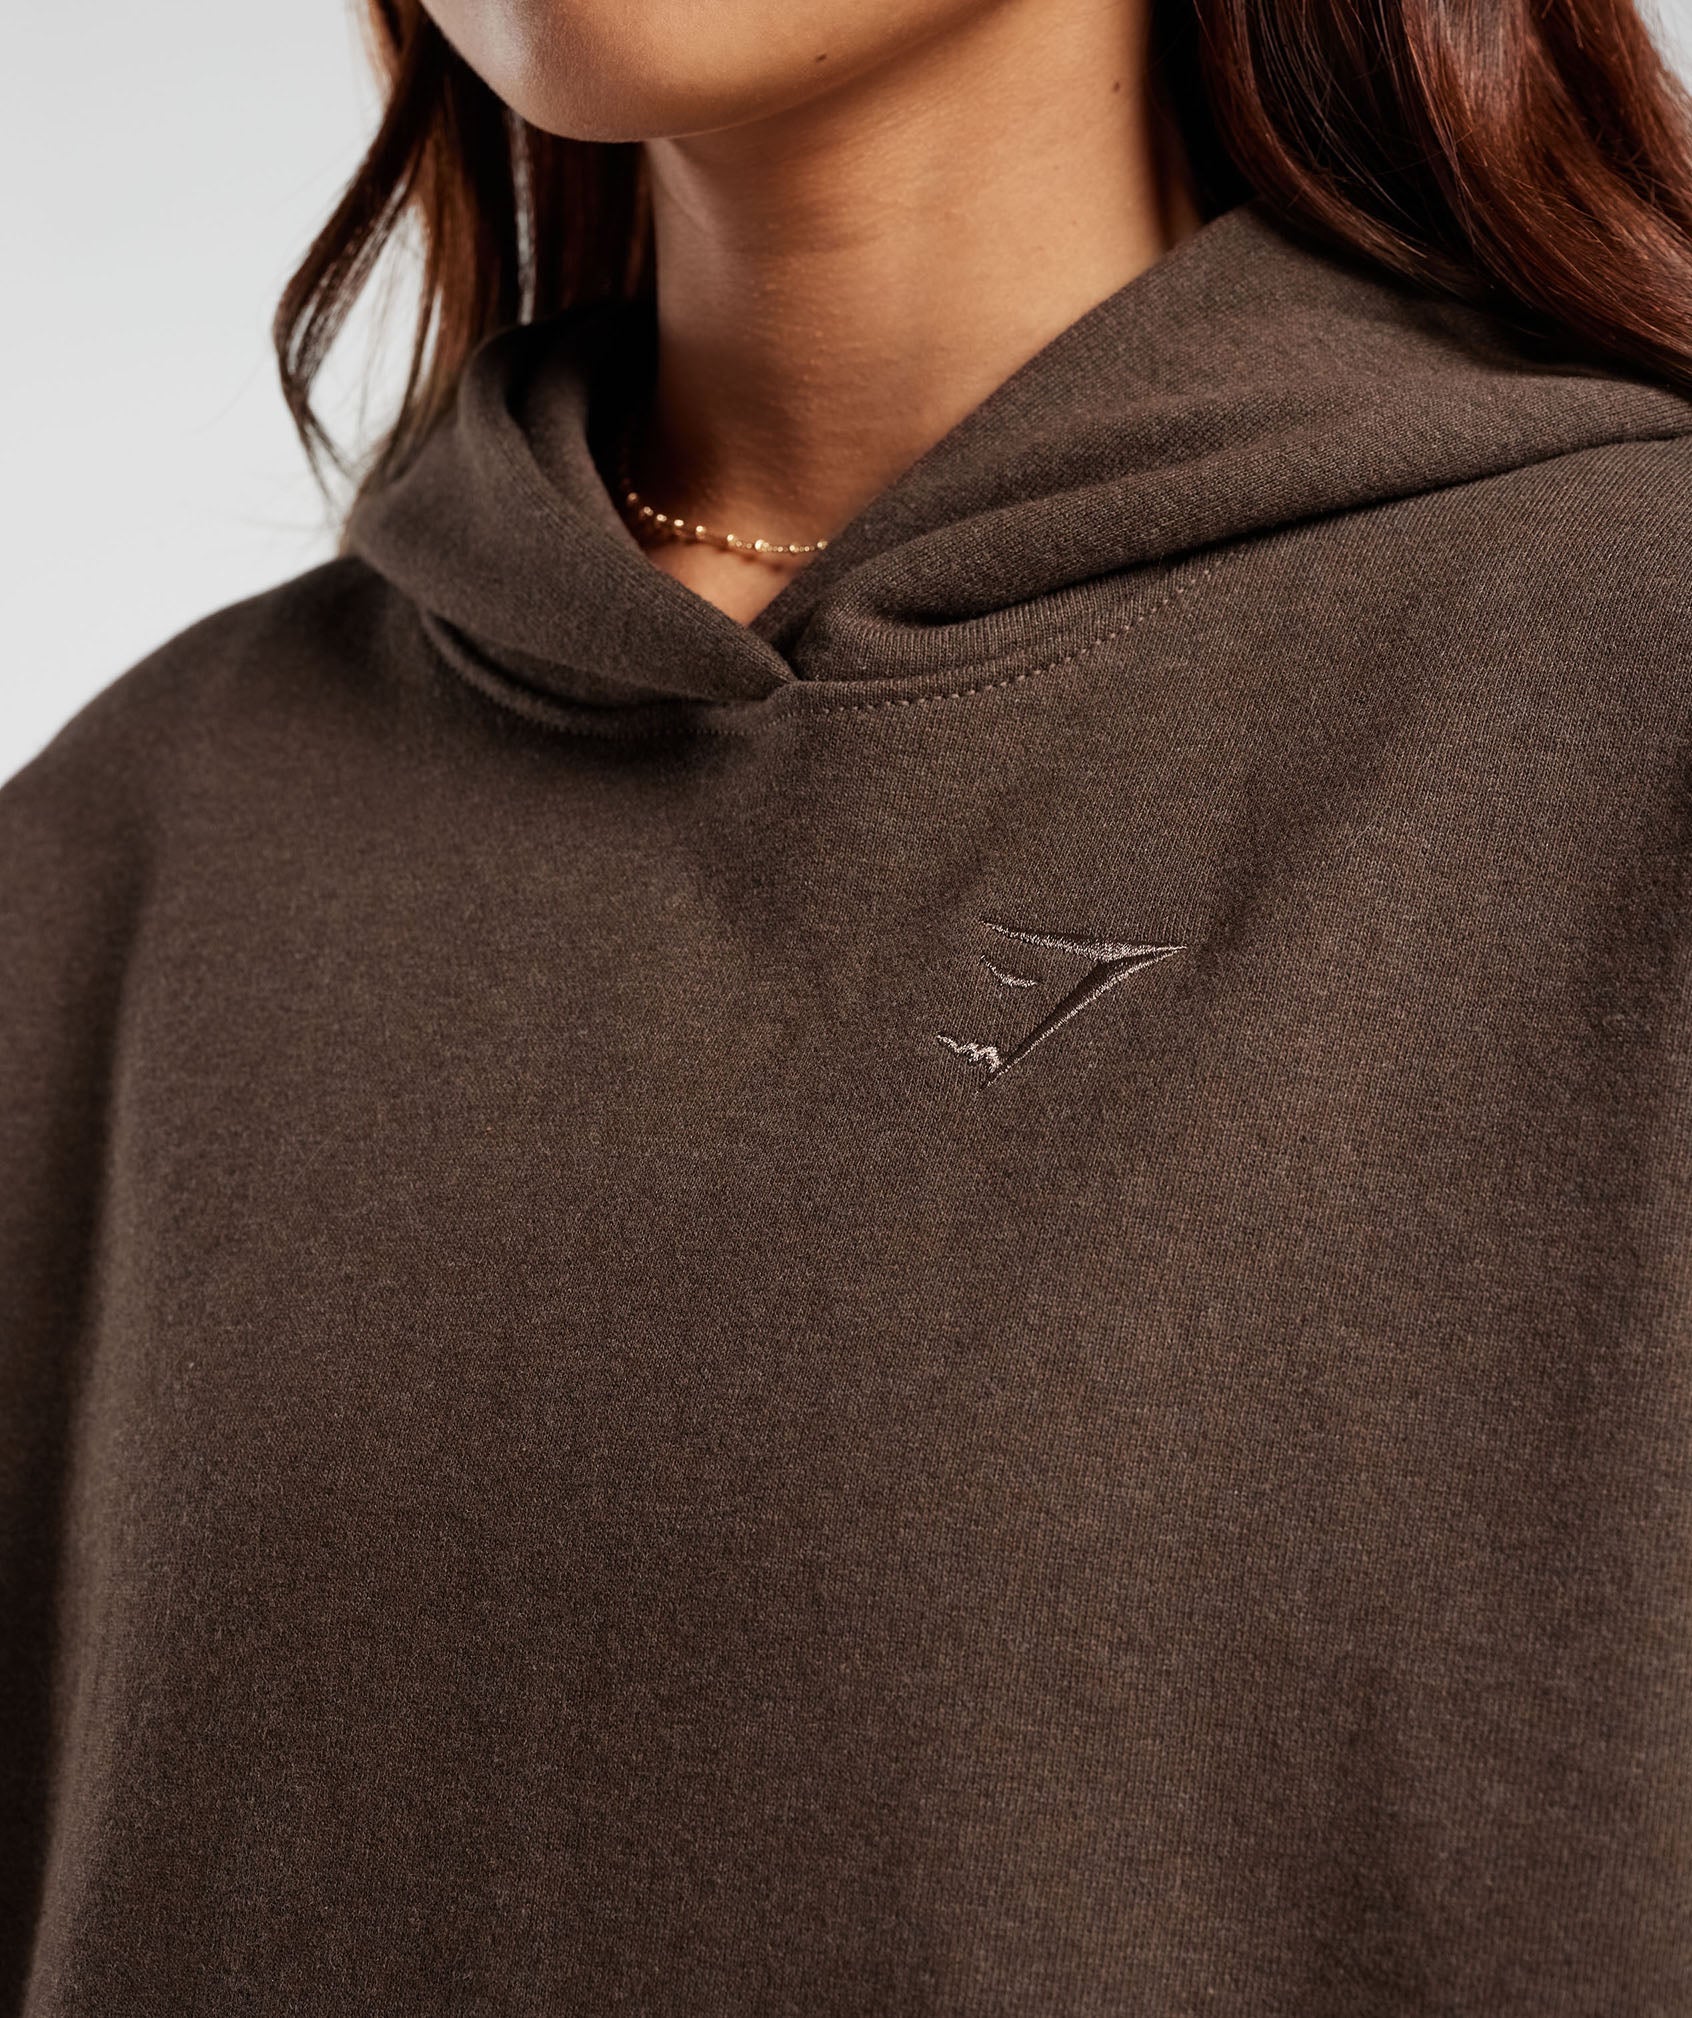 Rest Day Sweats Hoodie in Cozy Brown Marl - view 5